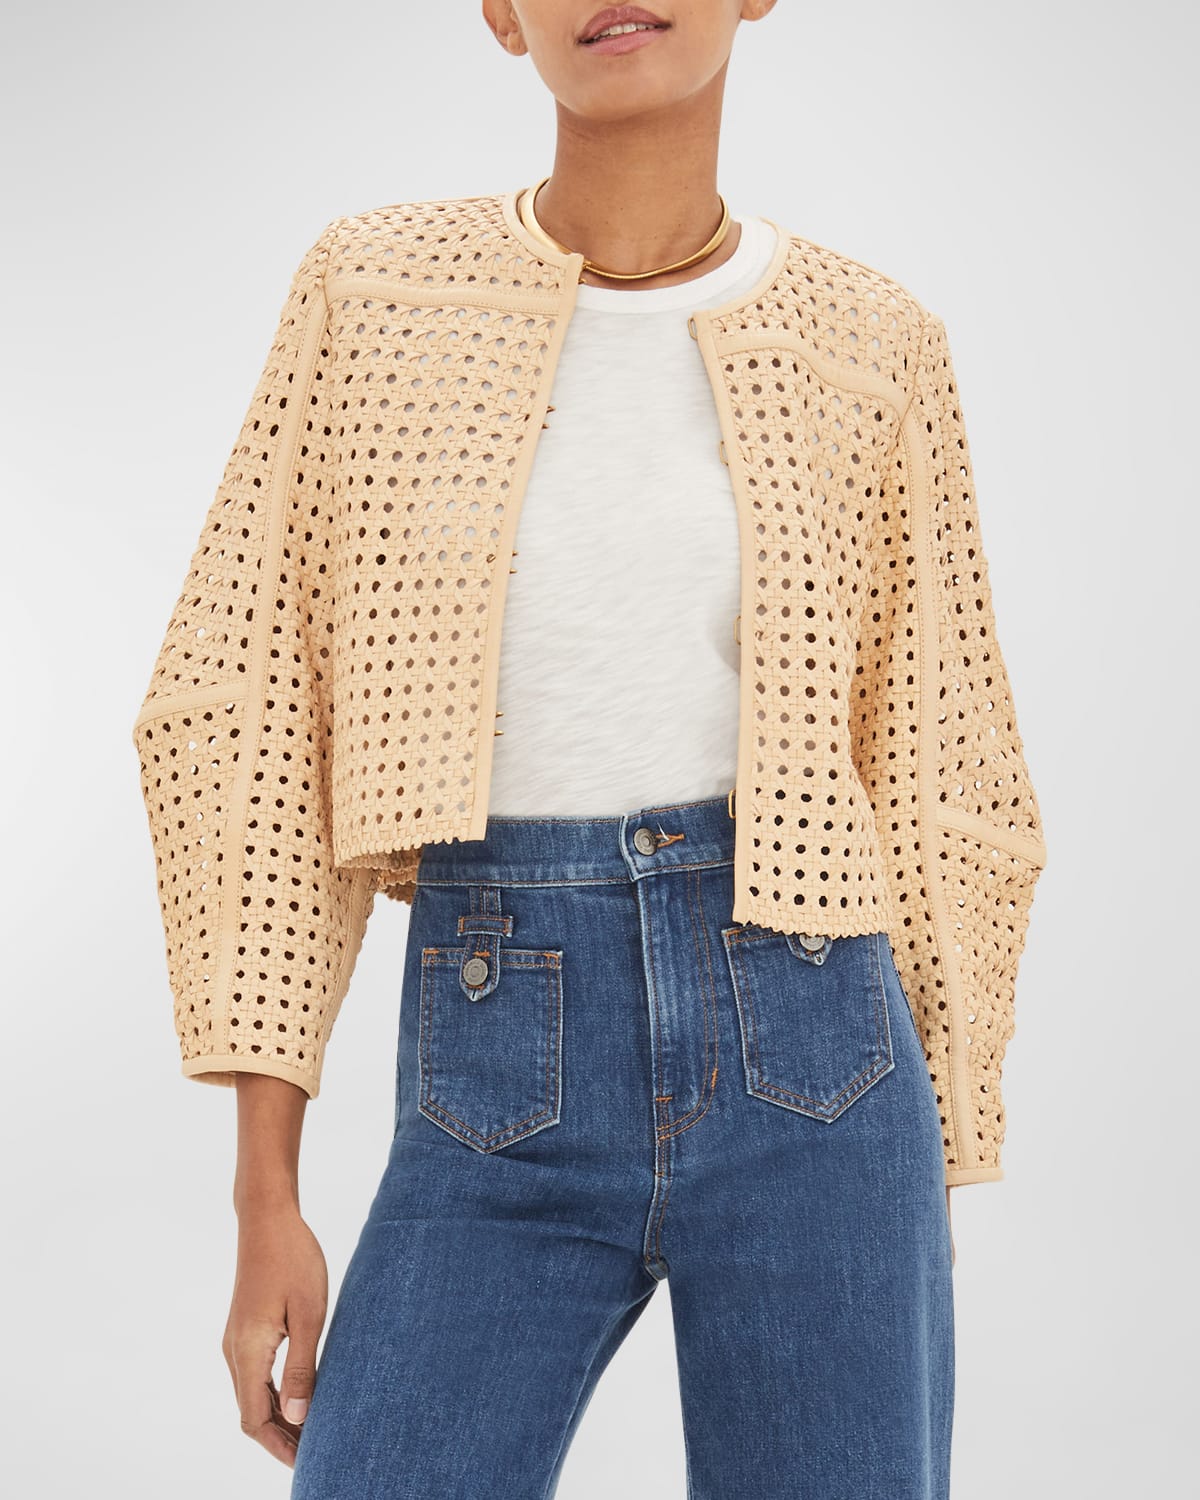 Veronica Beard Fio Woven Leather Jacket In Natural